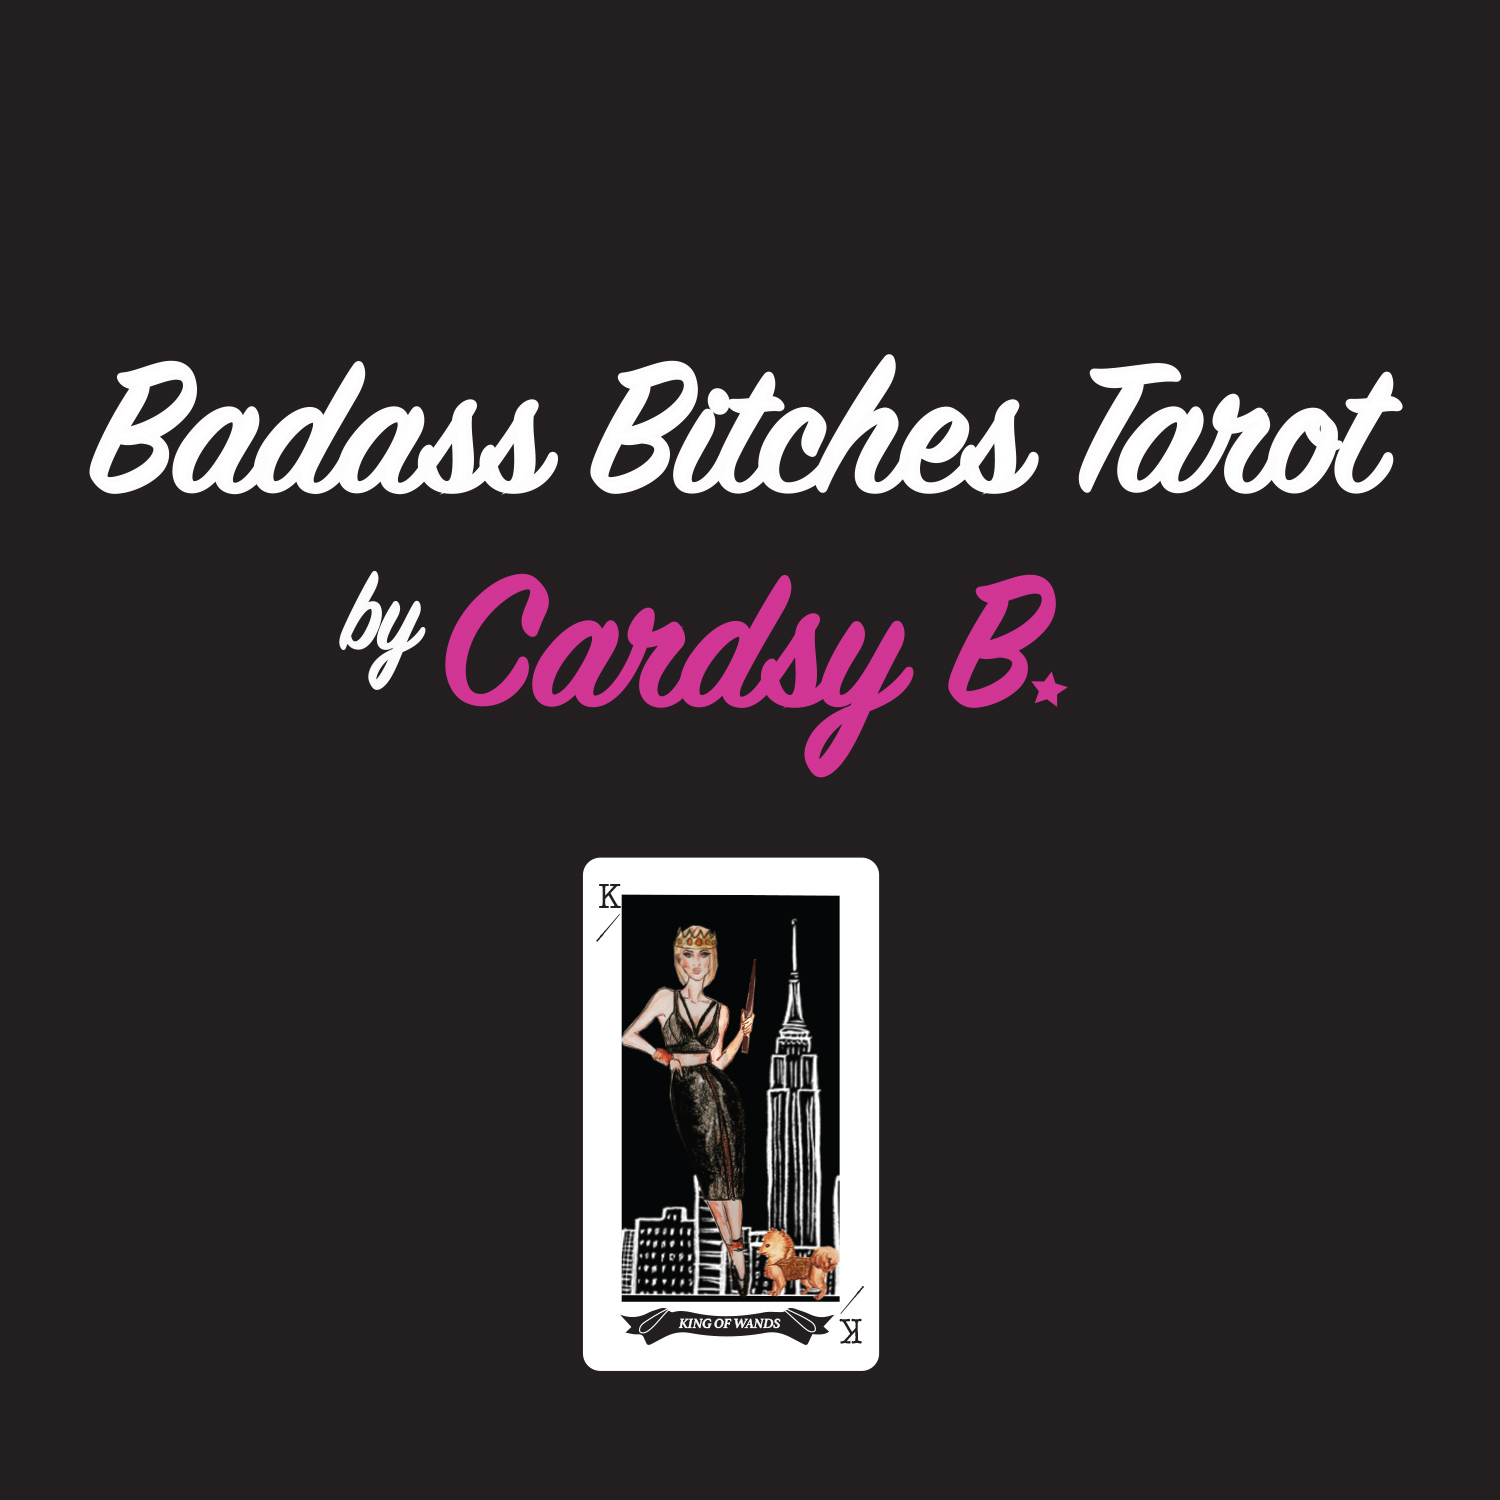 Badass Bitches Tarot by Cardsy B: Episode 1 July 22-28